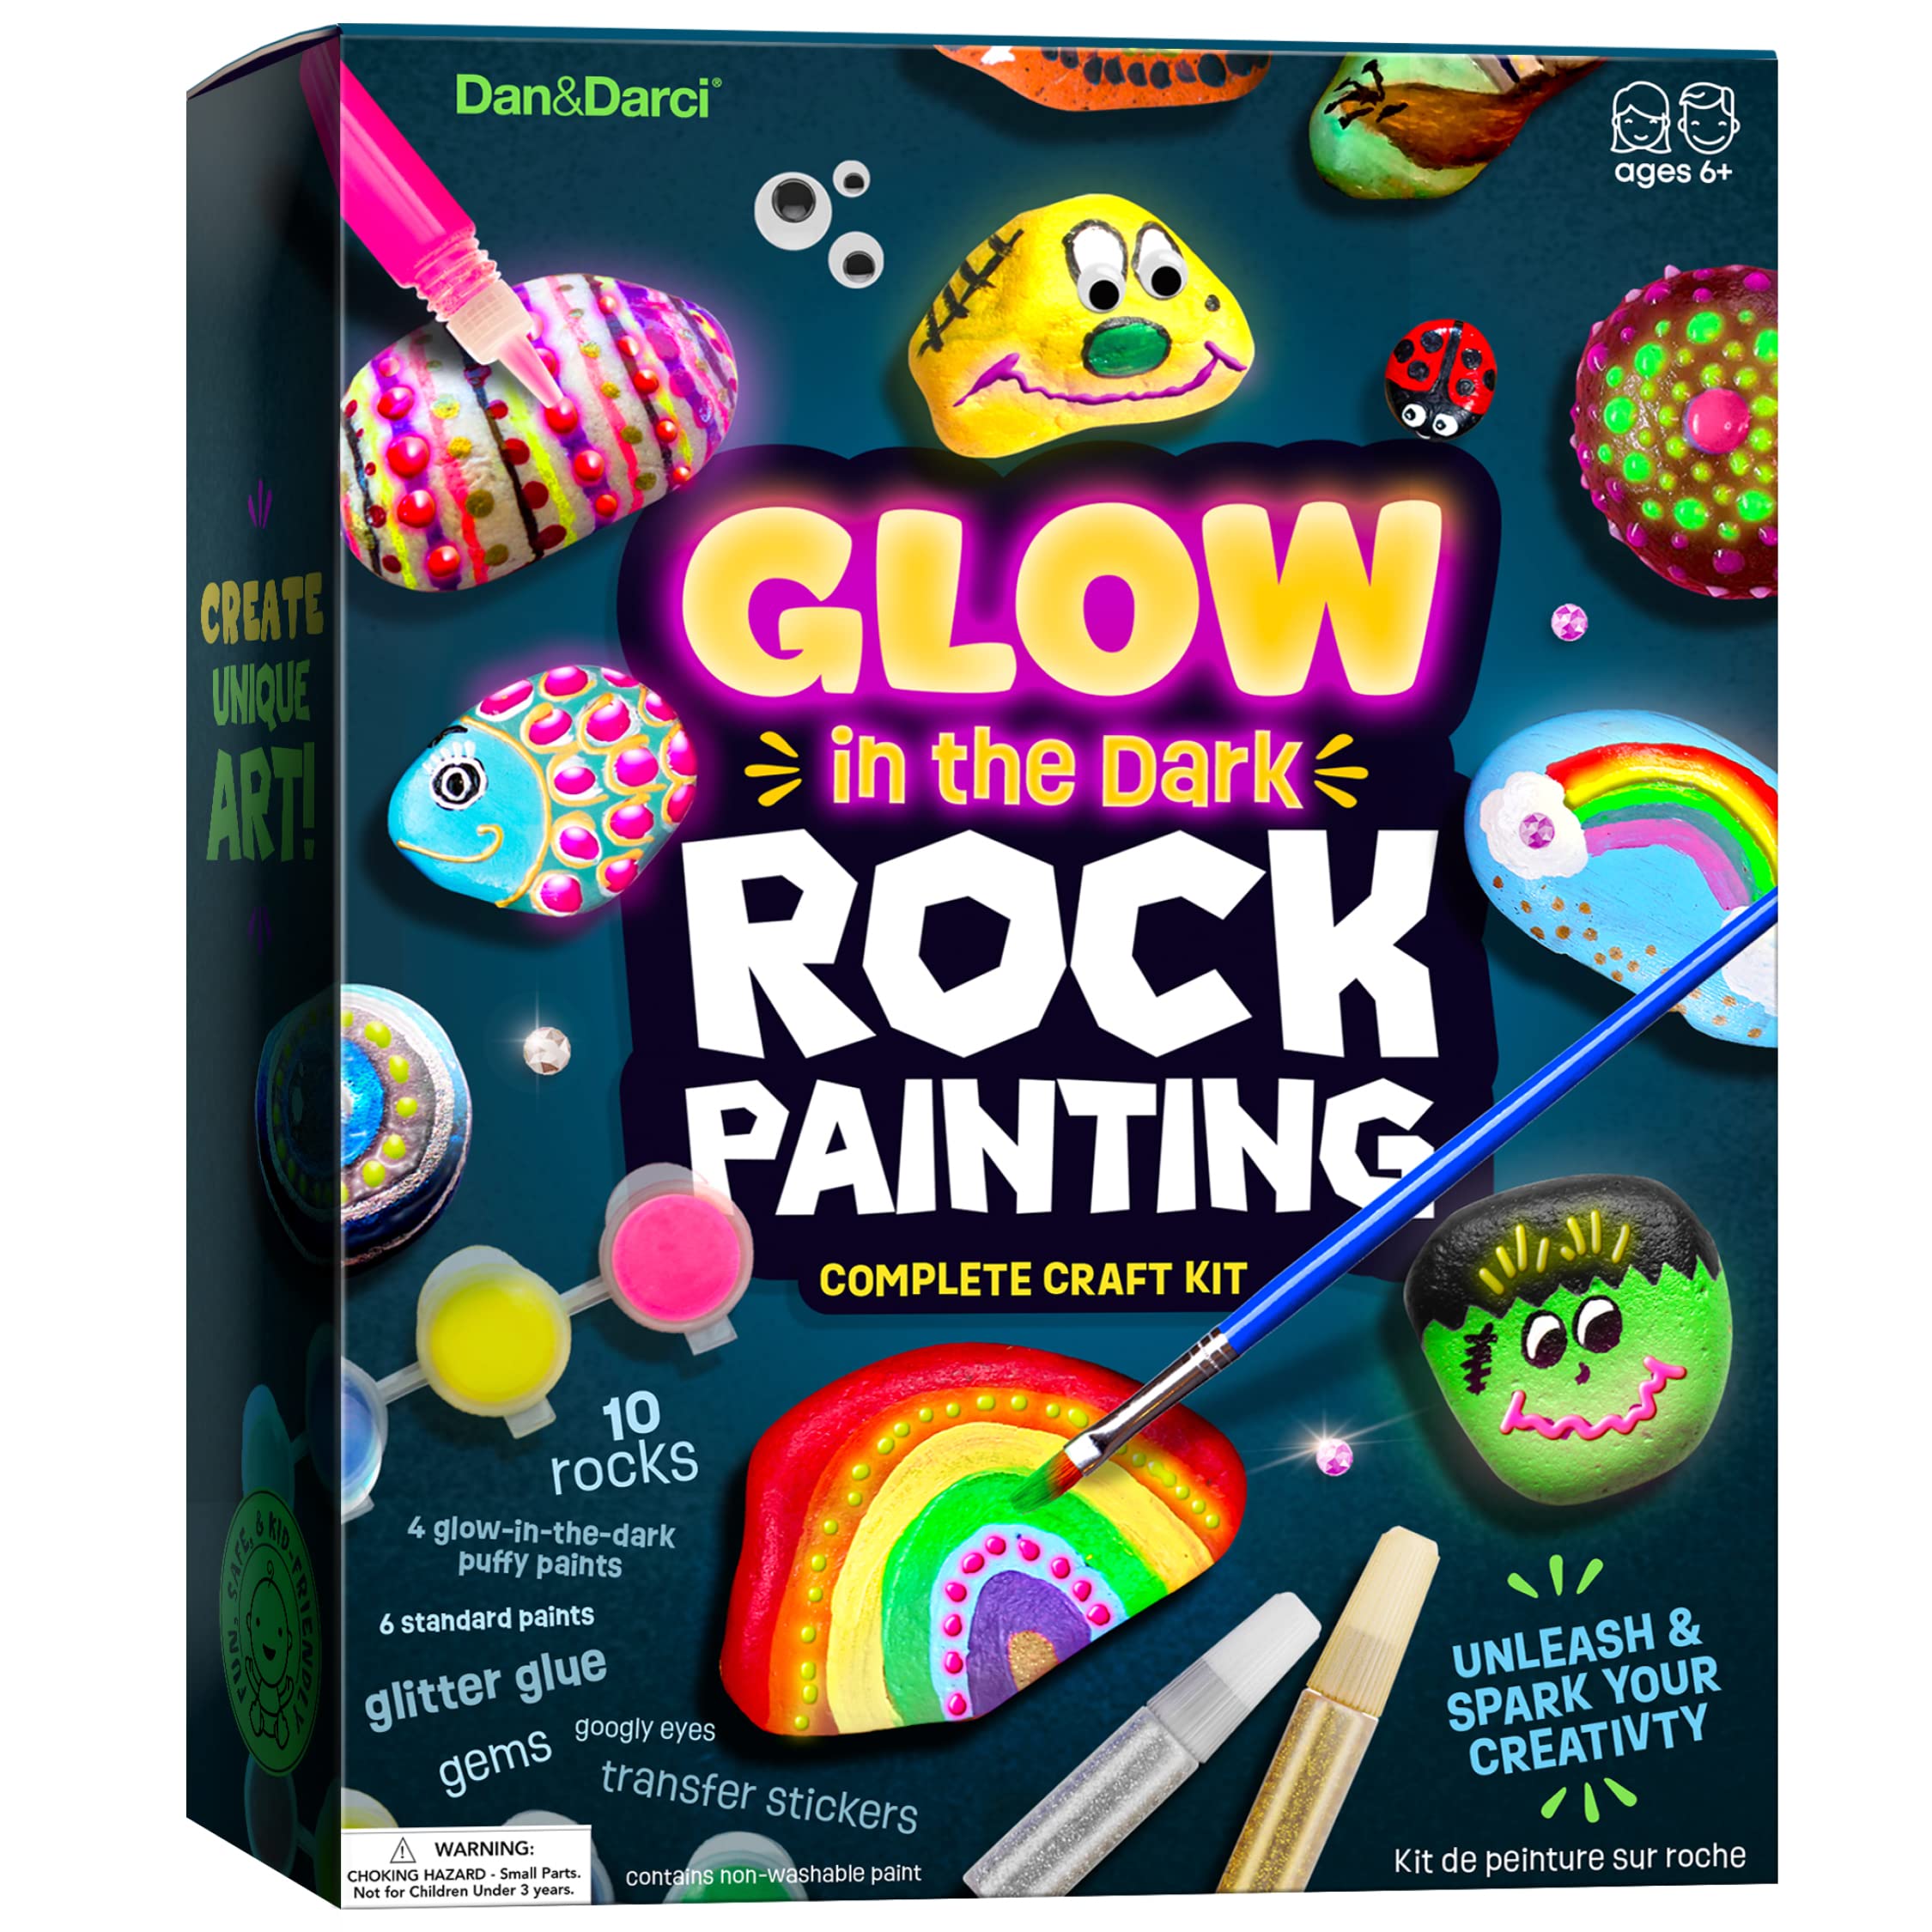 Kids Rock Painting Kit - Glow in The Dark - Arts & Crafts Easter Gifts for Boys and Girls Ages 6-12 - Craft Activities Kits - Creative Art Toys for 6, 7, 8, 9, 10, 11 & 12 Year Old Kids